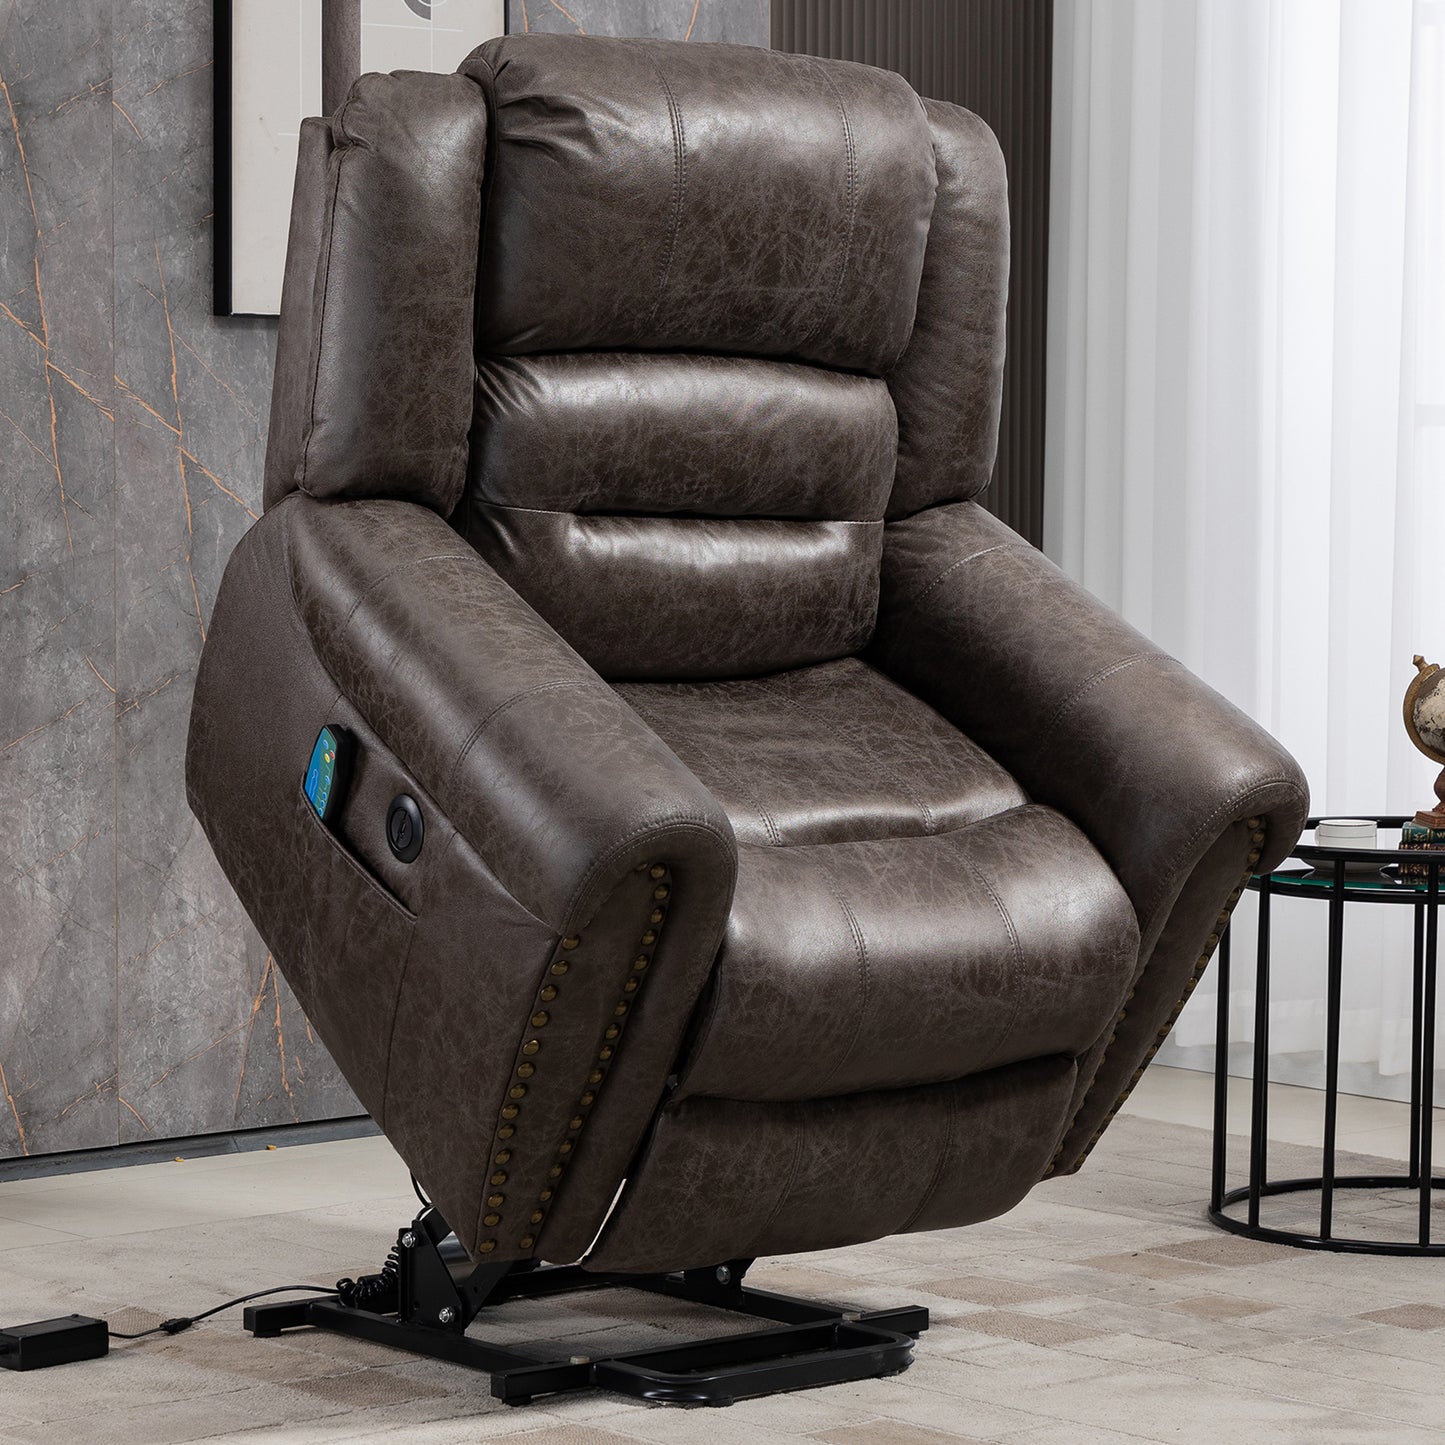 Power Lift Recliner Chair with Heat Therapy and Massage Function, Electric Lift Chair Recliner Fabric Single Sofa, Heavy Duty Living Room Furniture Home Theater Seating, 2 Large Side Pockets, Brown